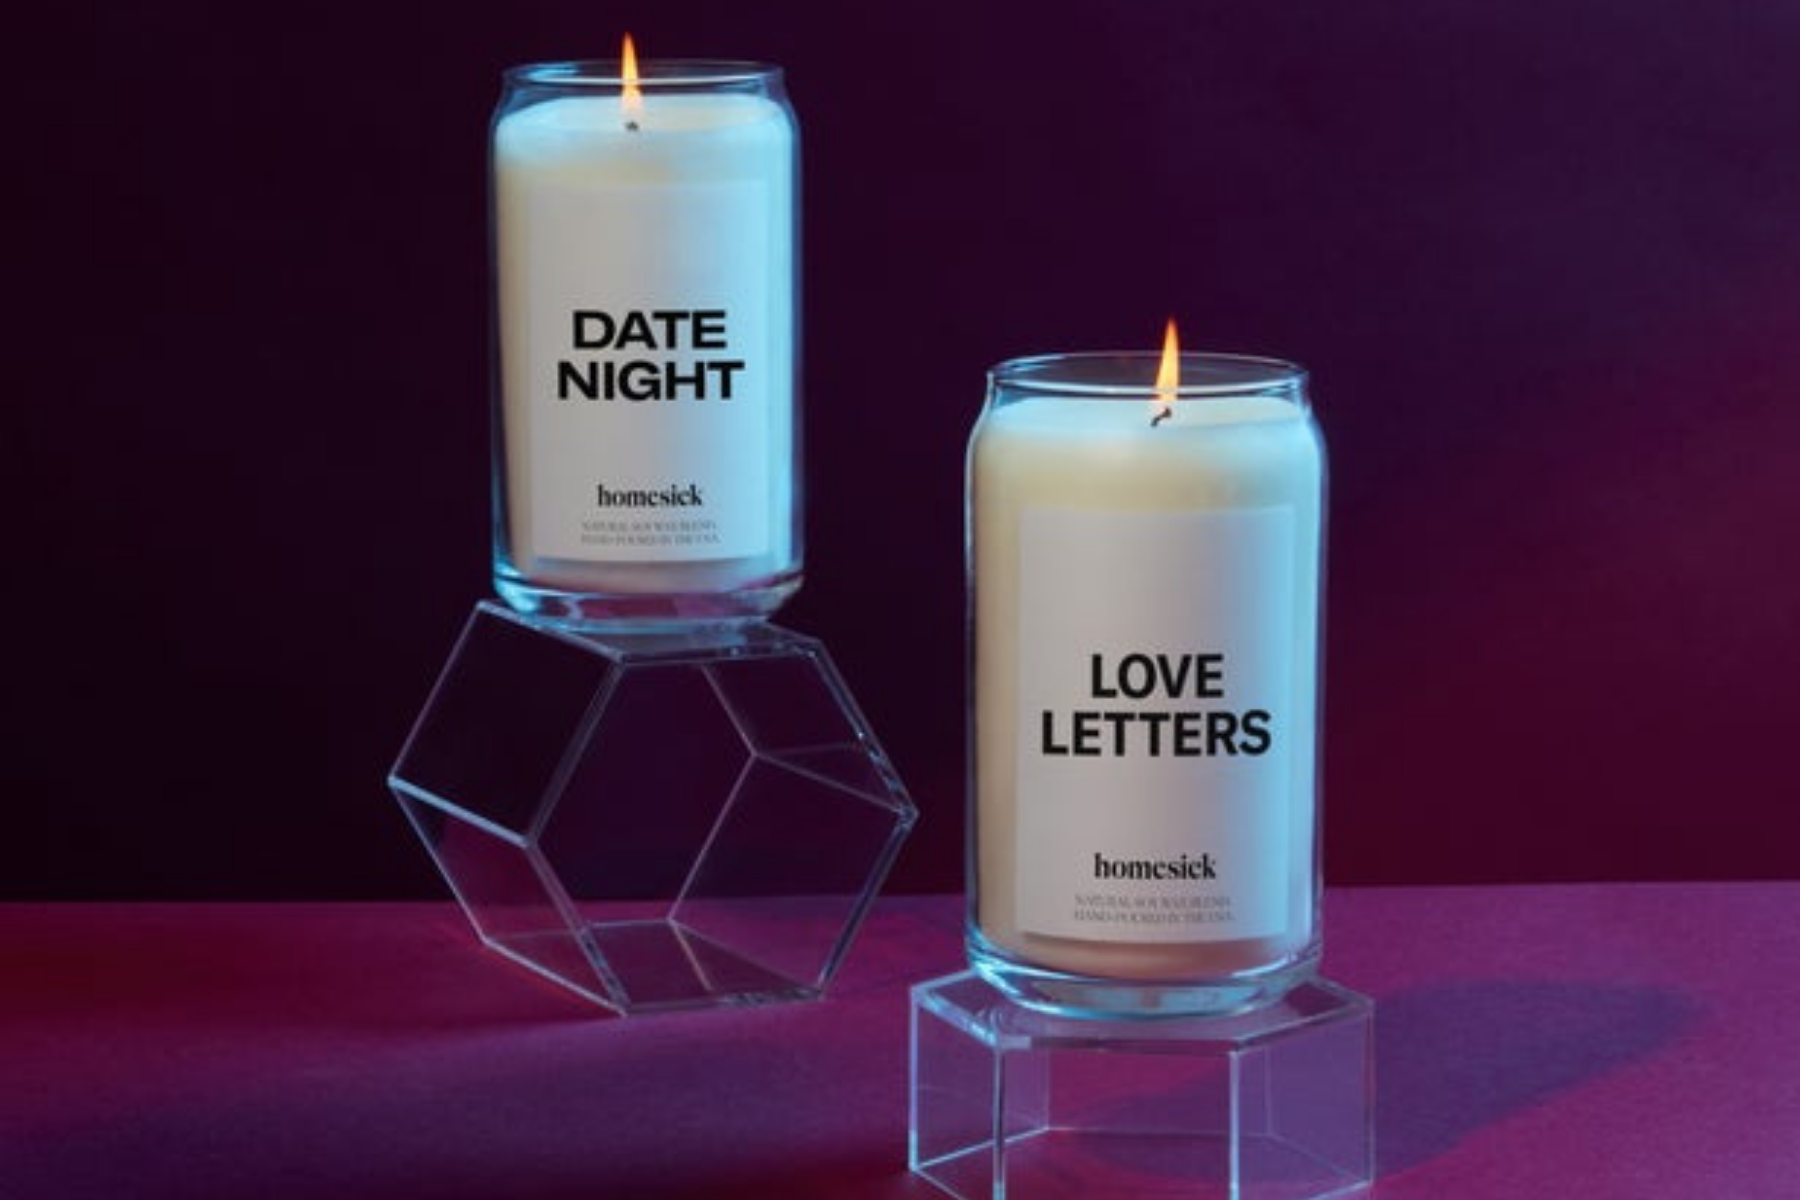 Homesick vegan candles in scents date night and love letters